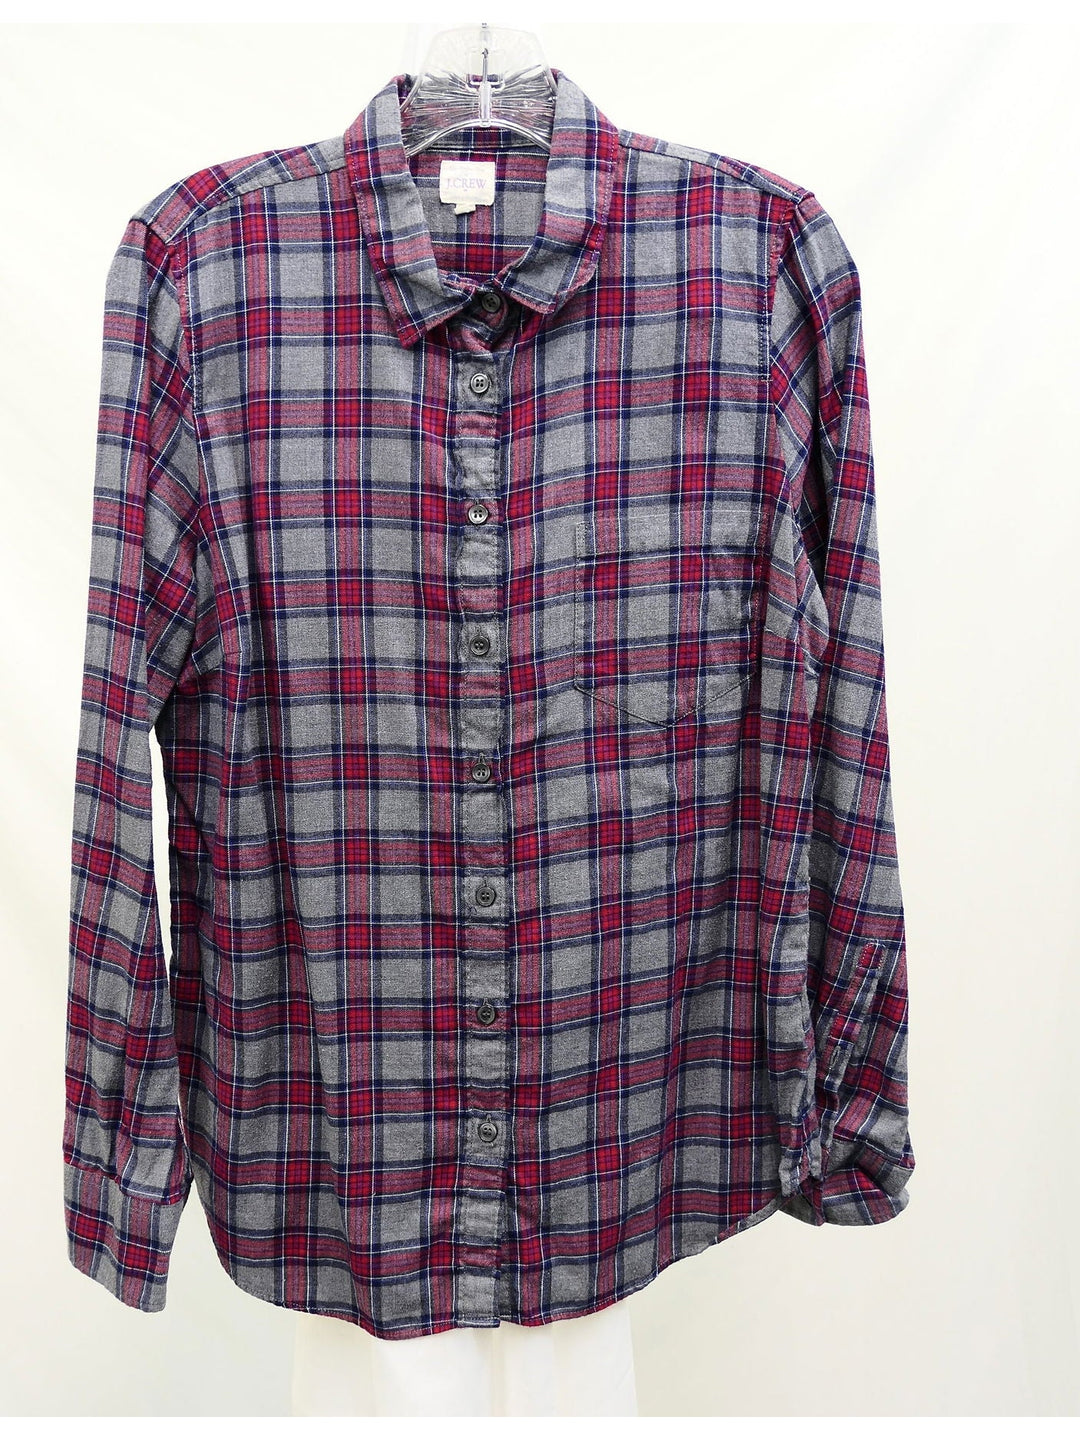 J Crew Flannel Shirt - Size M - The Kennedy Collective Thrift - 